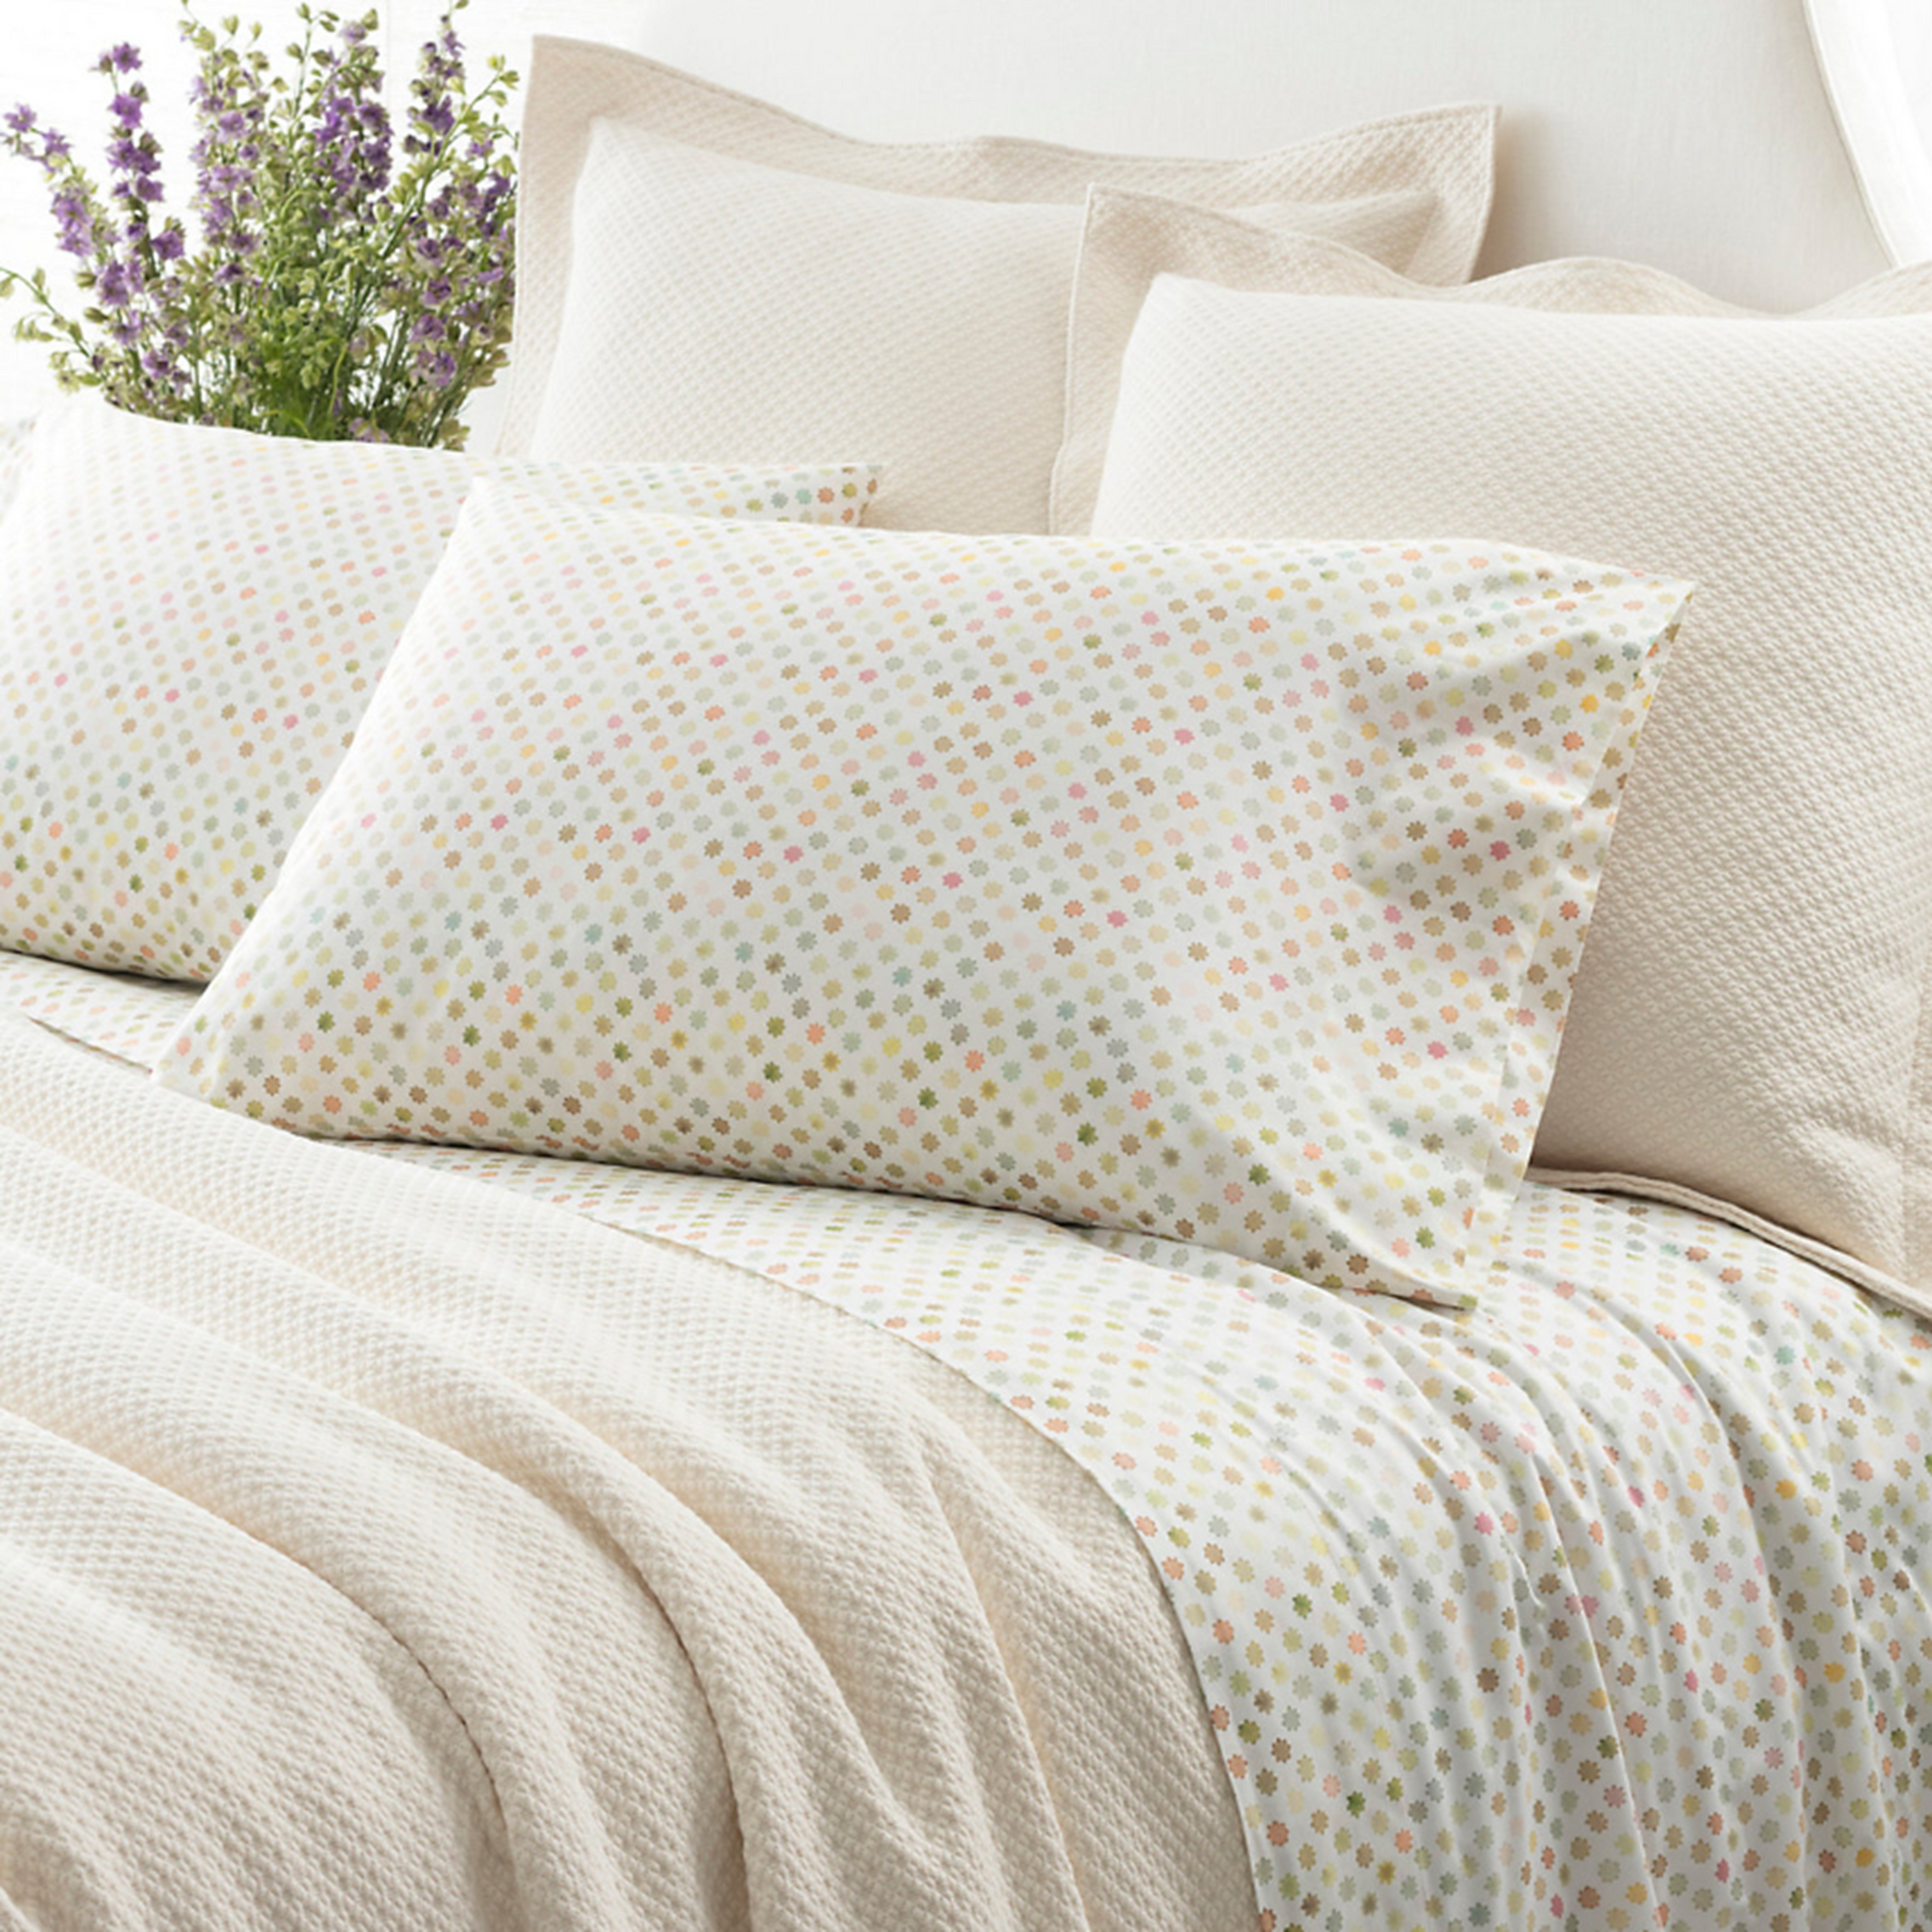 Bed Dressed in Pine Cone Hill Watercolor Dots Bedding